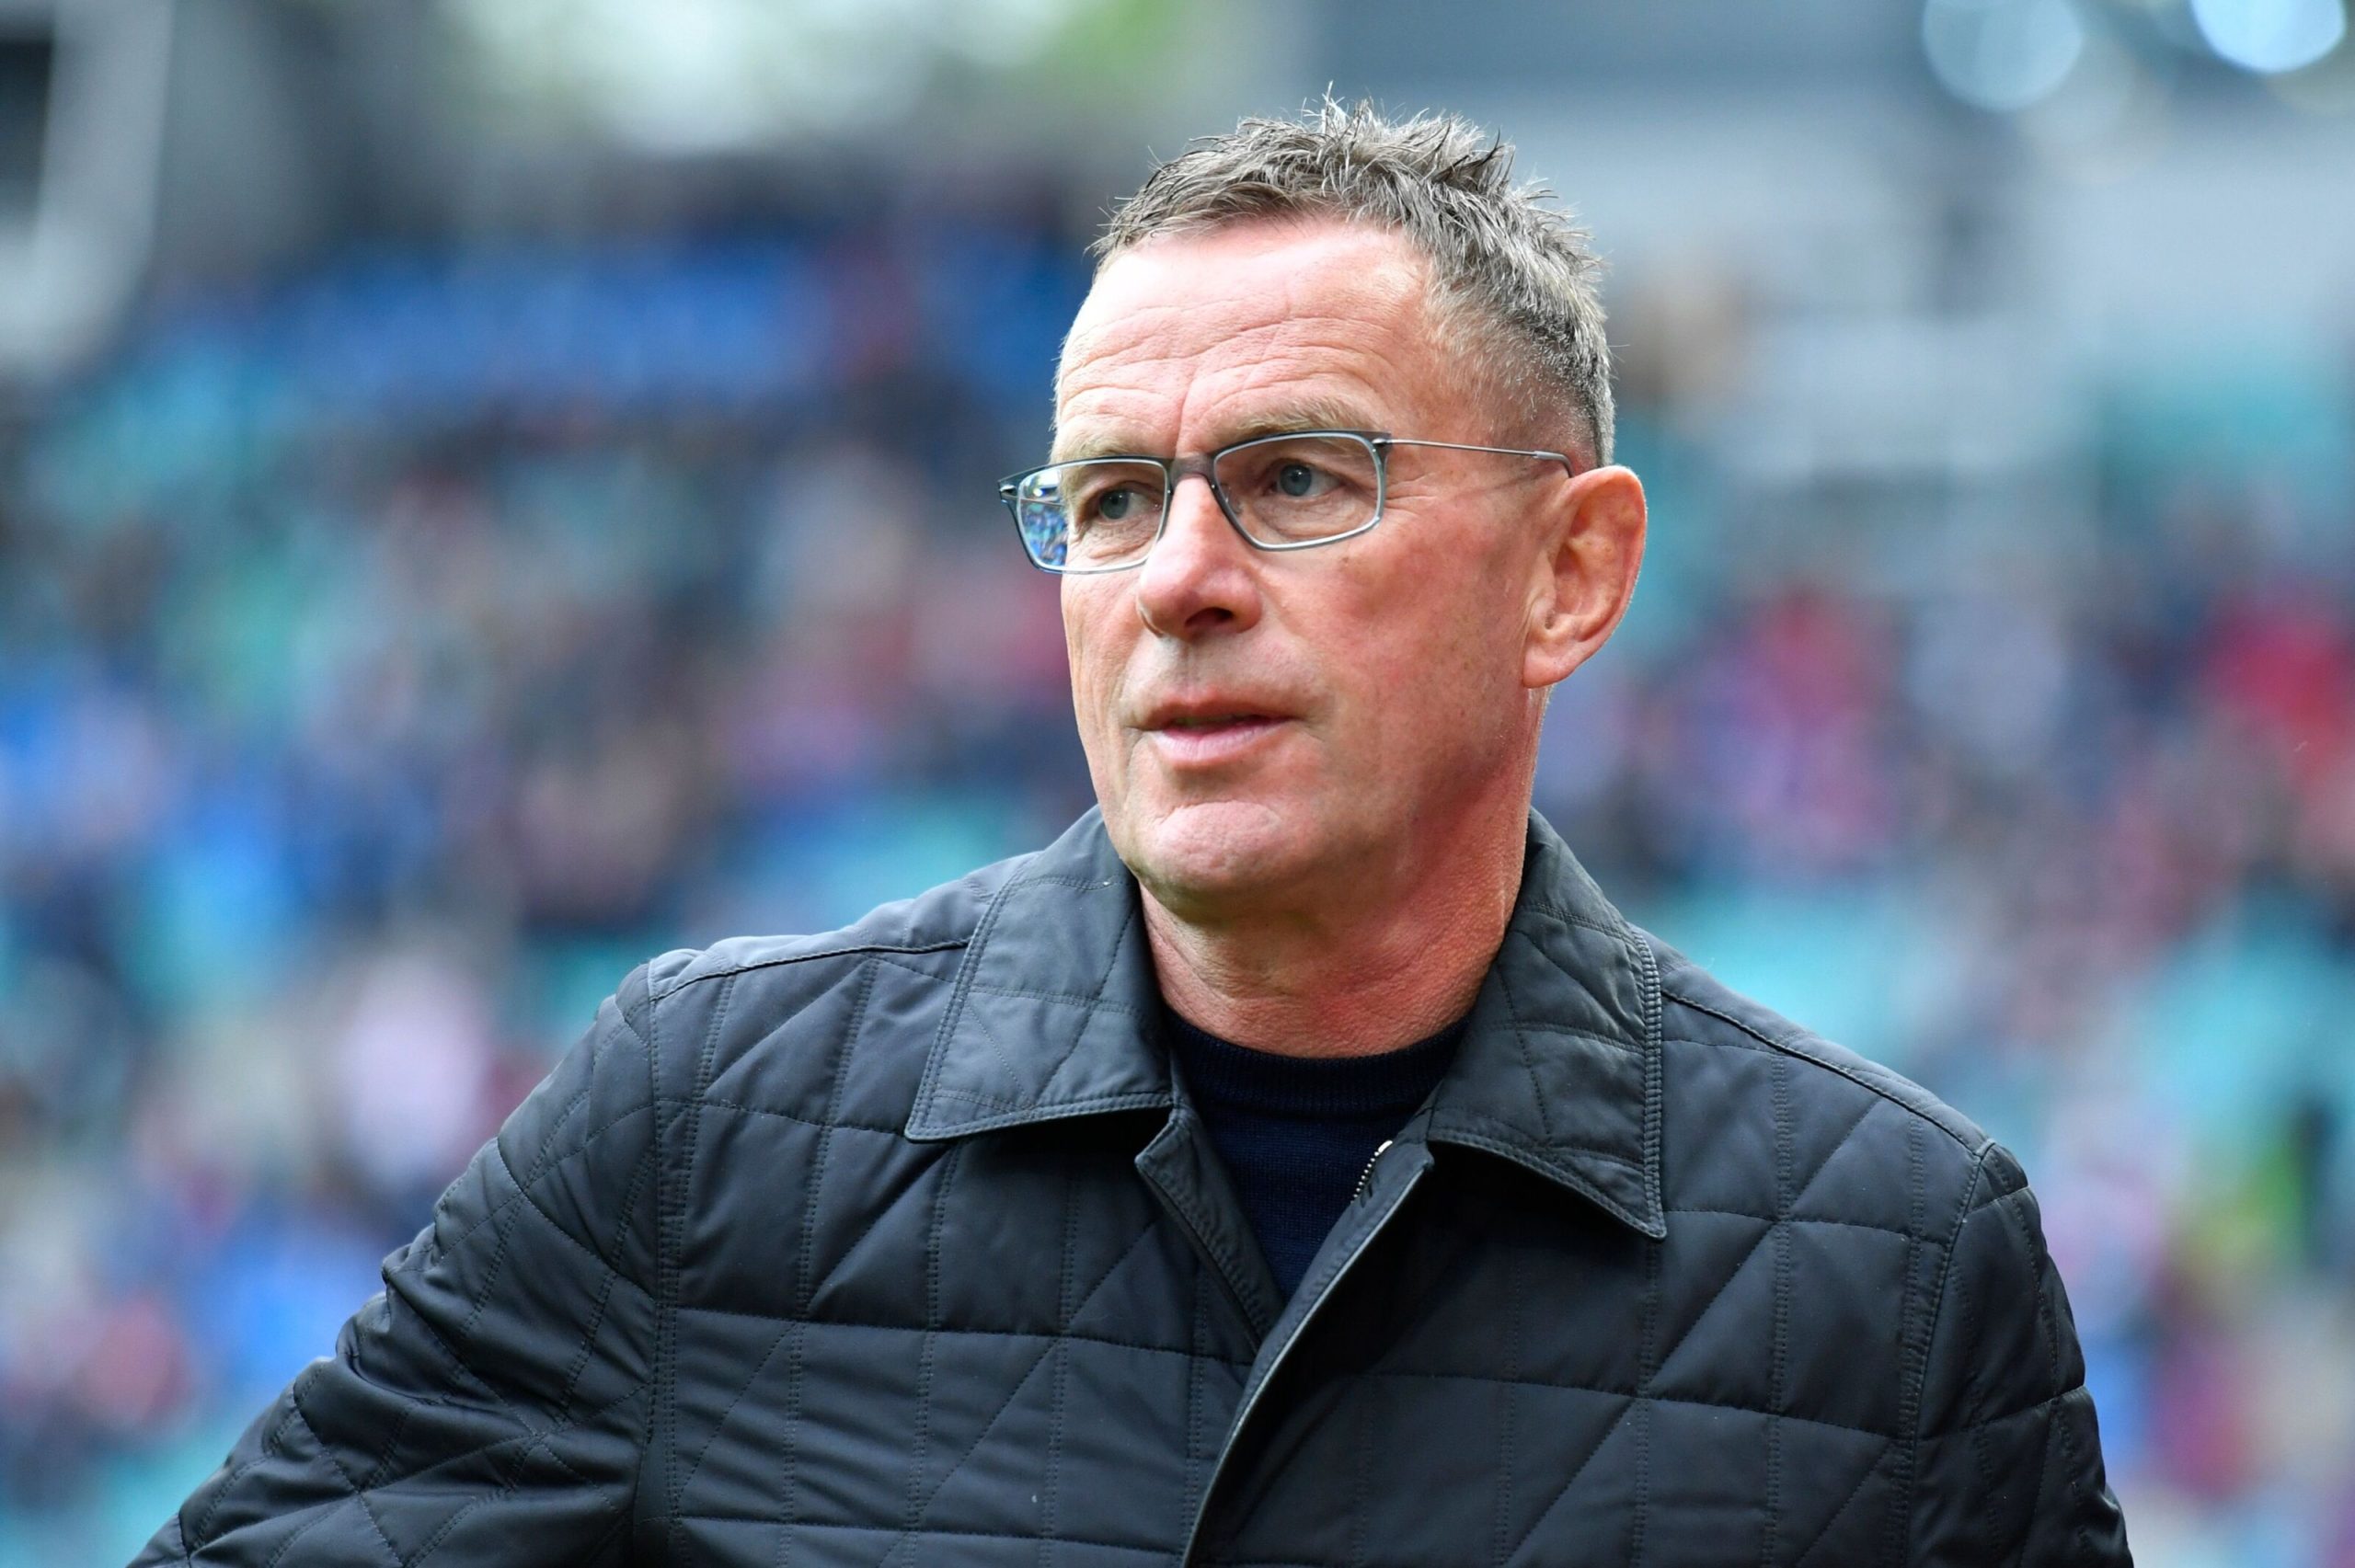 Manchester United New Manager: IT’S OFFICIAL!!! Ralf Rangnick is appointed as Man United’s new Interim Manager until the end of the season; Club Statement confirms